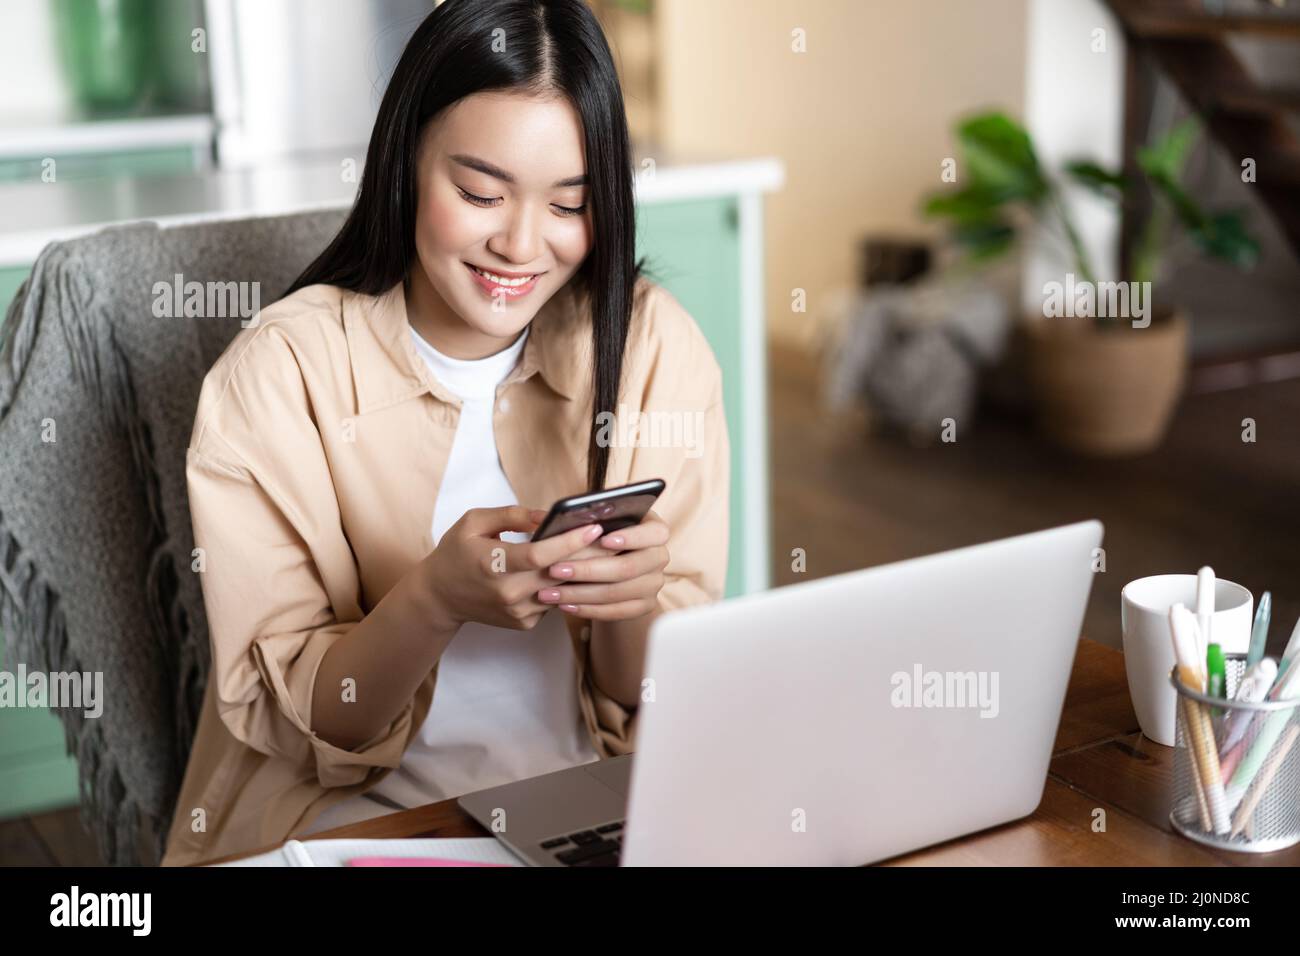 Asian female student looking at mobile phone, sitting at home with laptop, register online course on laptop, working remotely Stock Photo